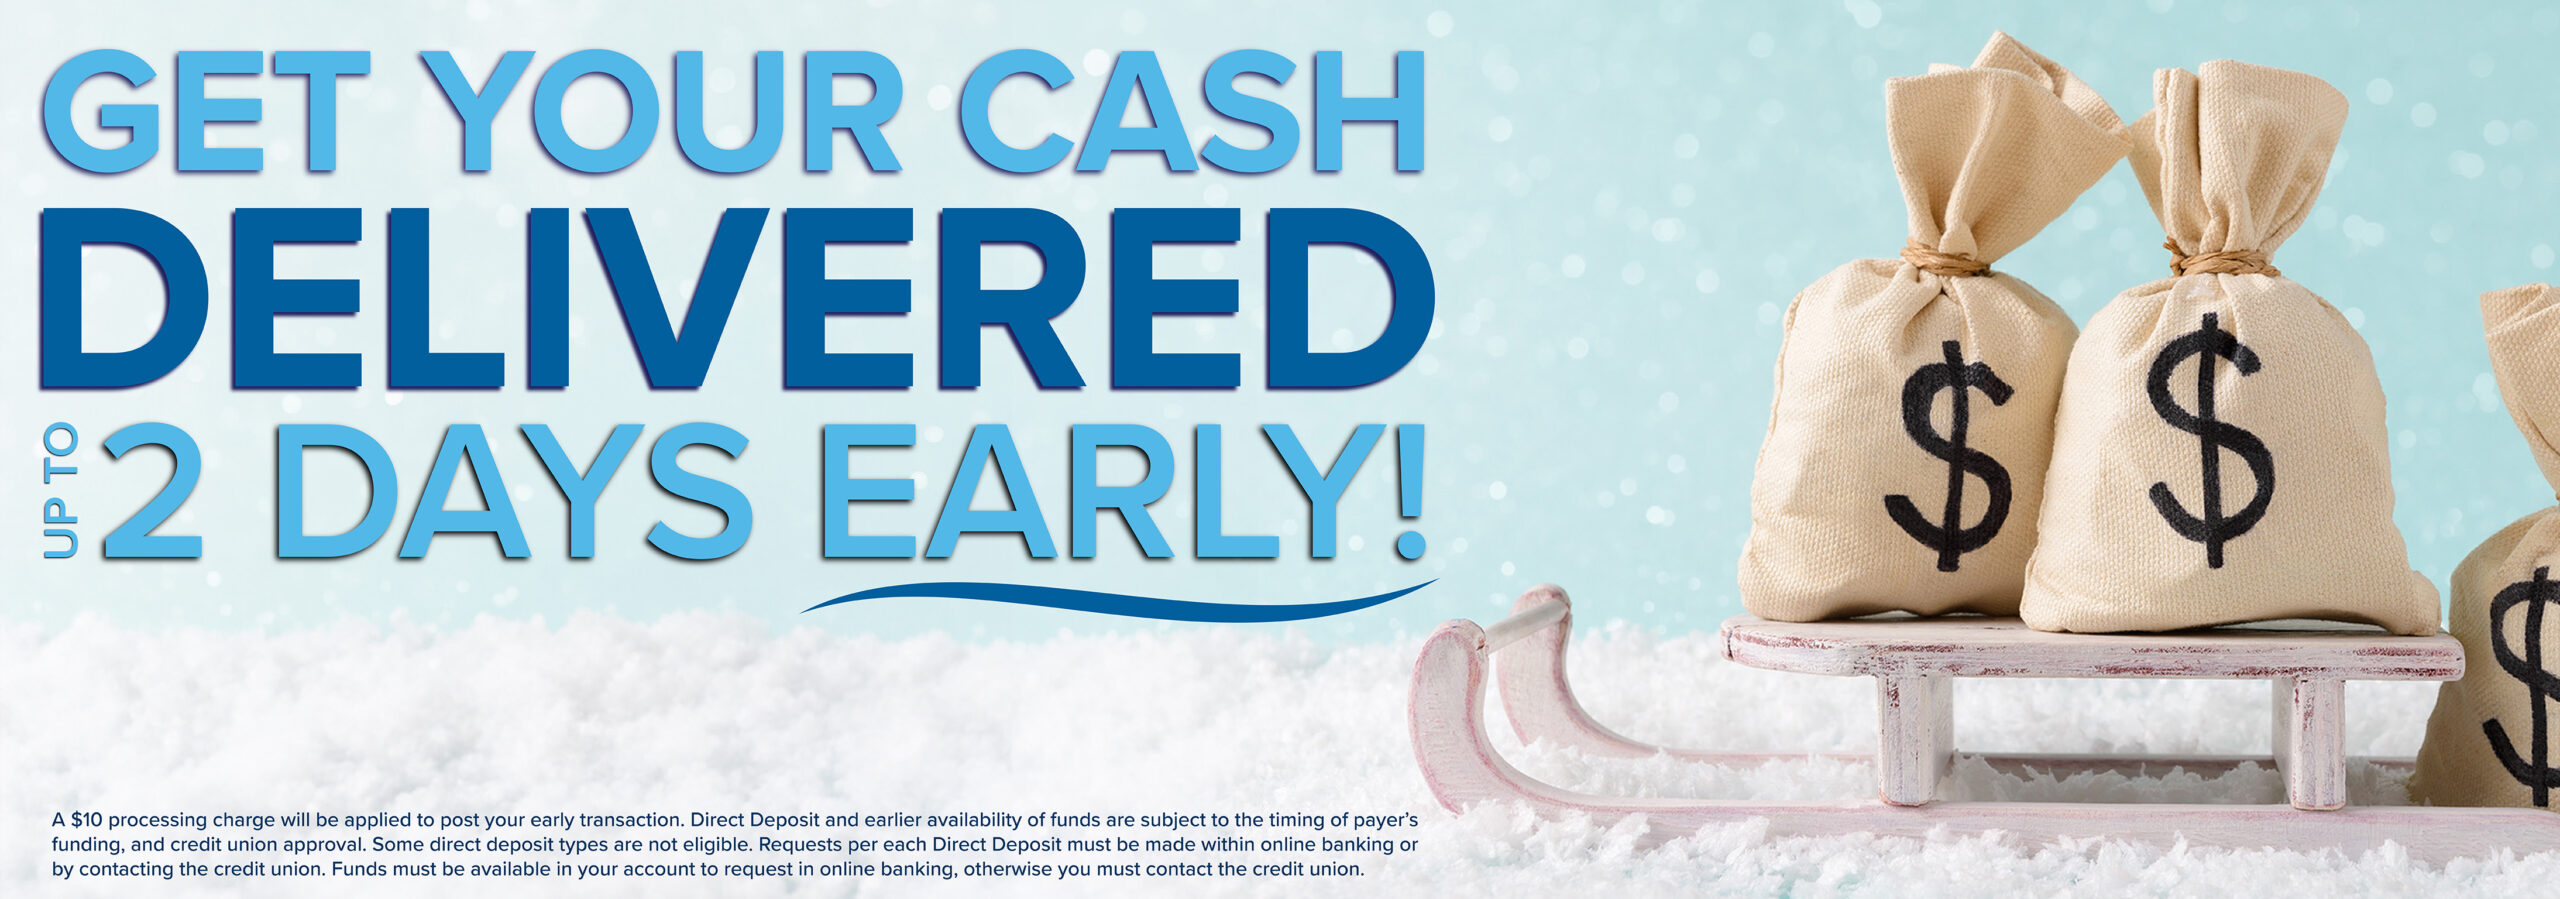 Get your cash delivered up to two days early with ACH on Demand!